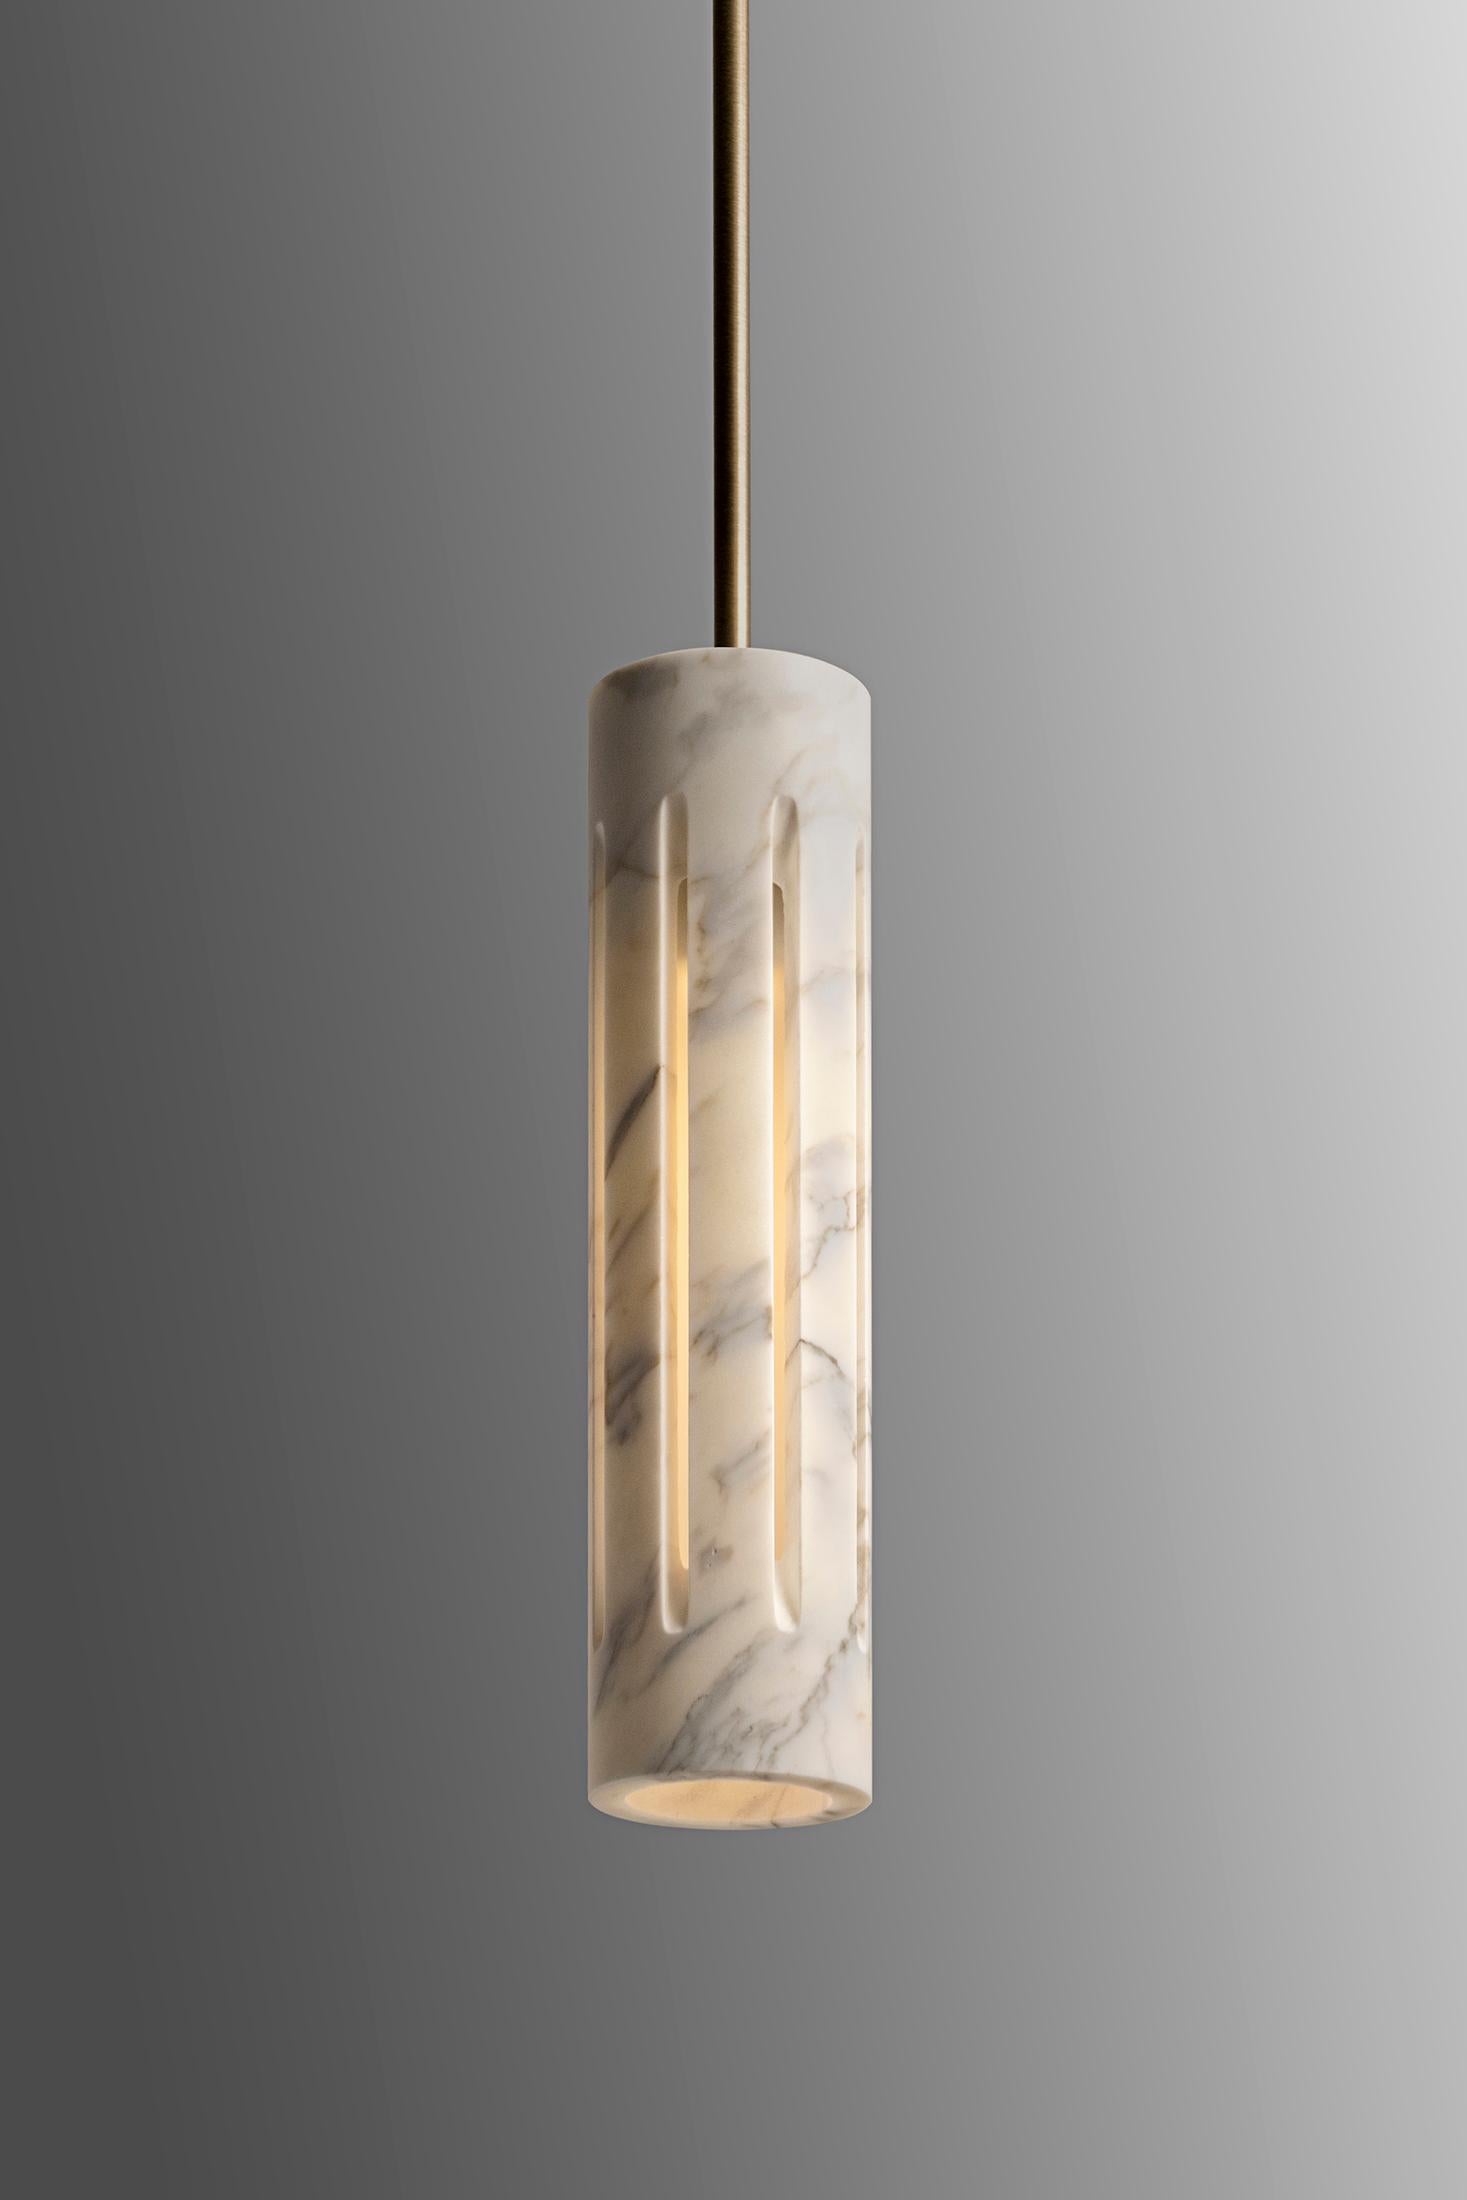 Aura Marble Lantern Pendant Lamp by Etamorph
Dimensions: Ø 50 x D 10 cm.
Materials: Calacata Marble and Black Matter stone.

All our lamps can be wired according to each country. If sold to the USA it will be wired for the USA for instance. Please